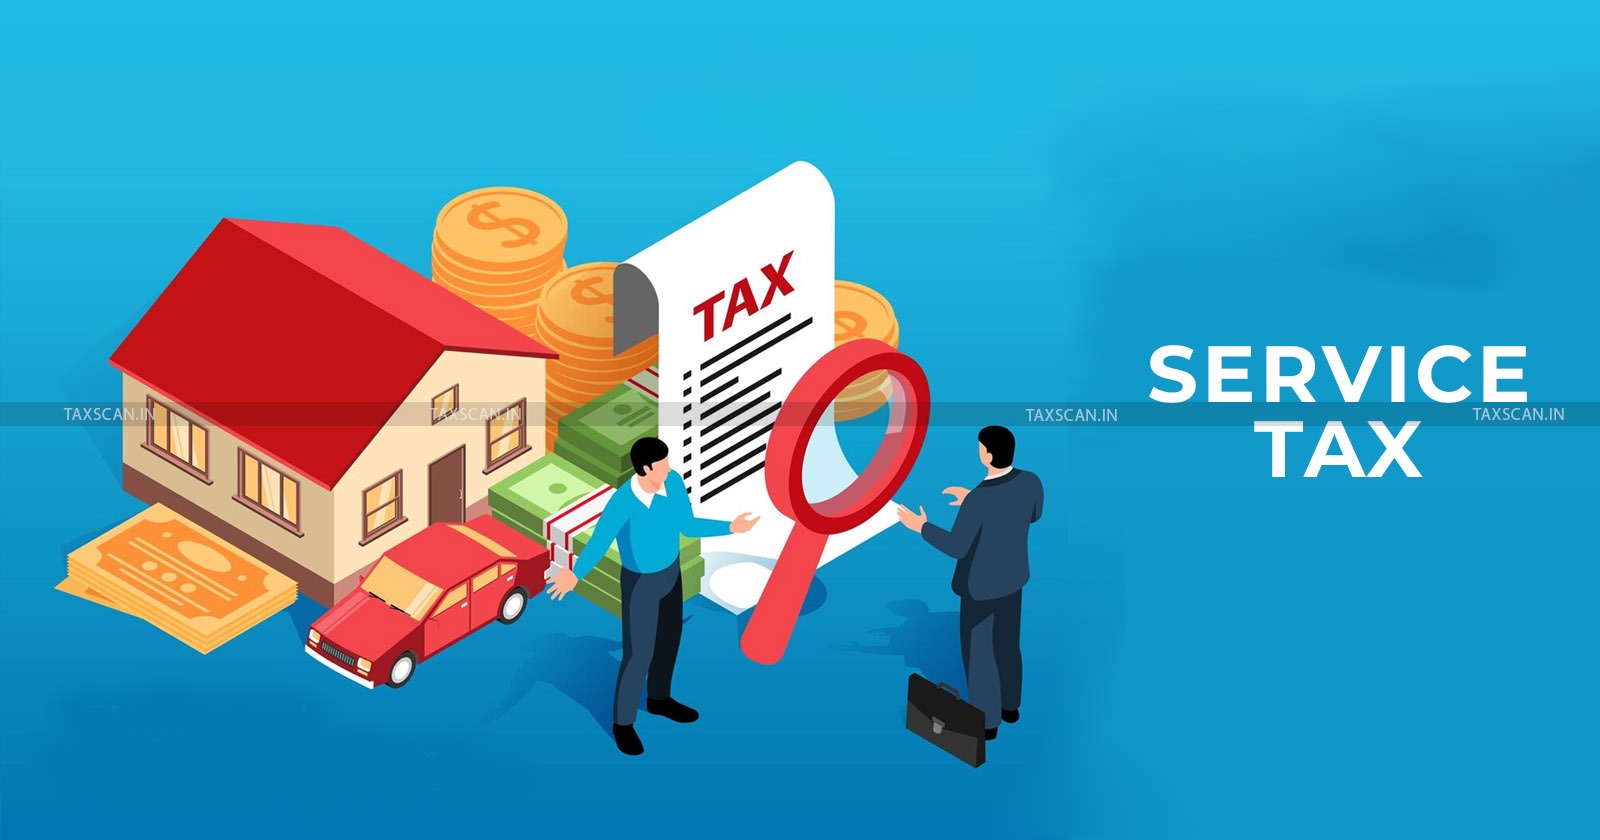 Service Tax Liability - Service Tax - Examination of Activities - Transactions - CESTAT - taxscan